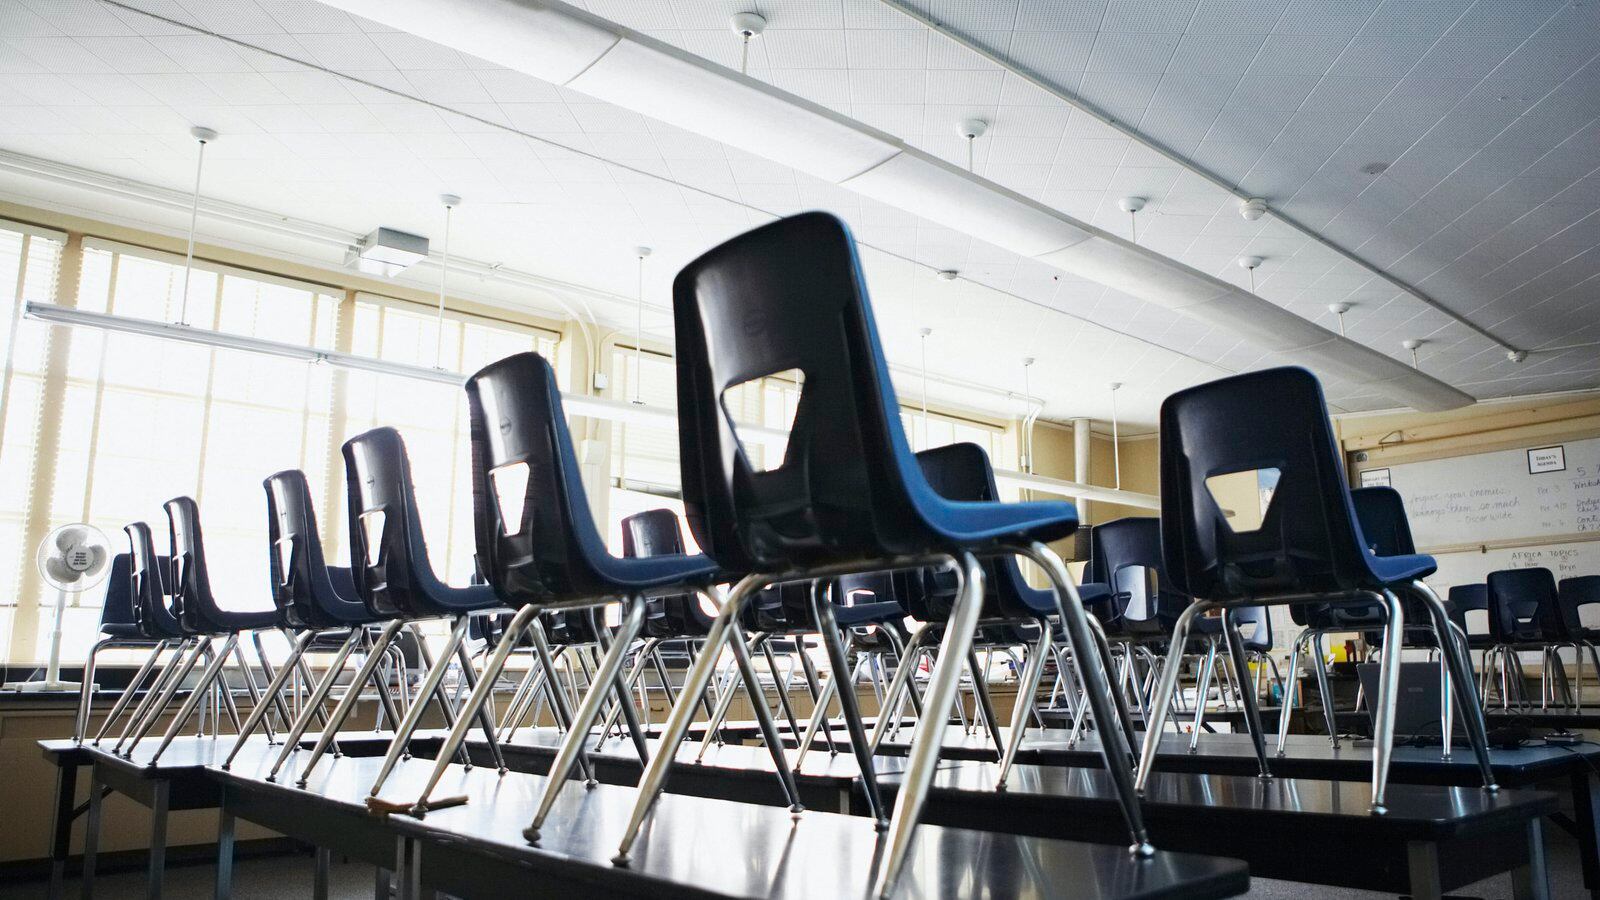 Tennessee schools are closed through at least April 24 under a directive of Gov. Bill Lee. Emergency rules approved by the State Board of Education on Thursday cover immediate concerns caused by COVID-19 for the 2019-20 school year.